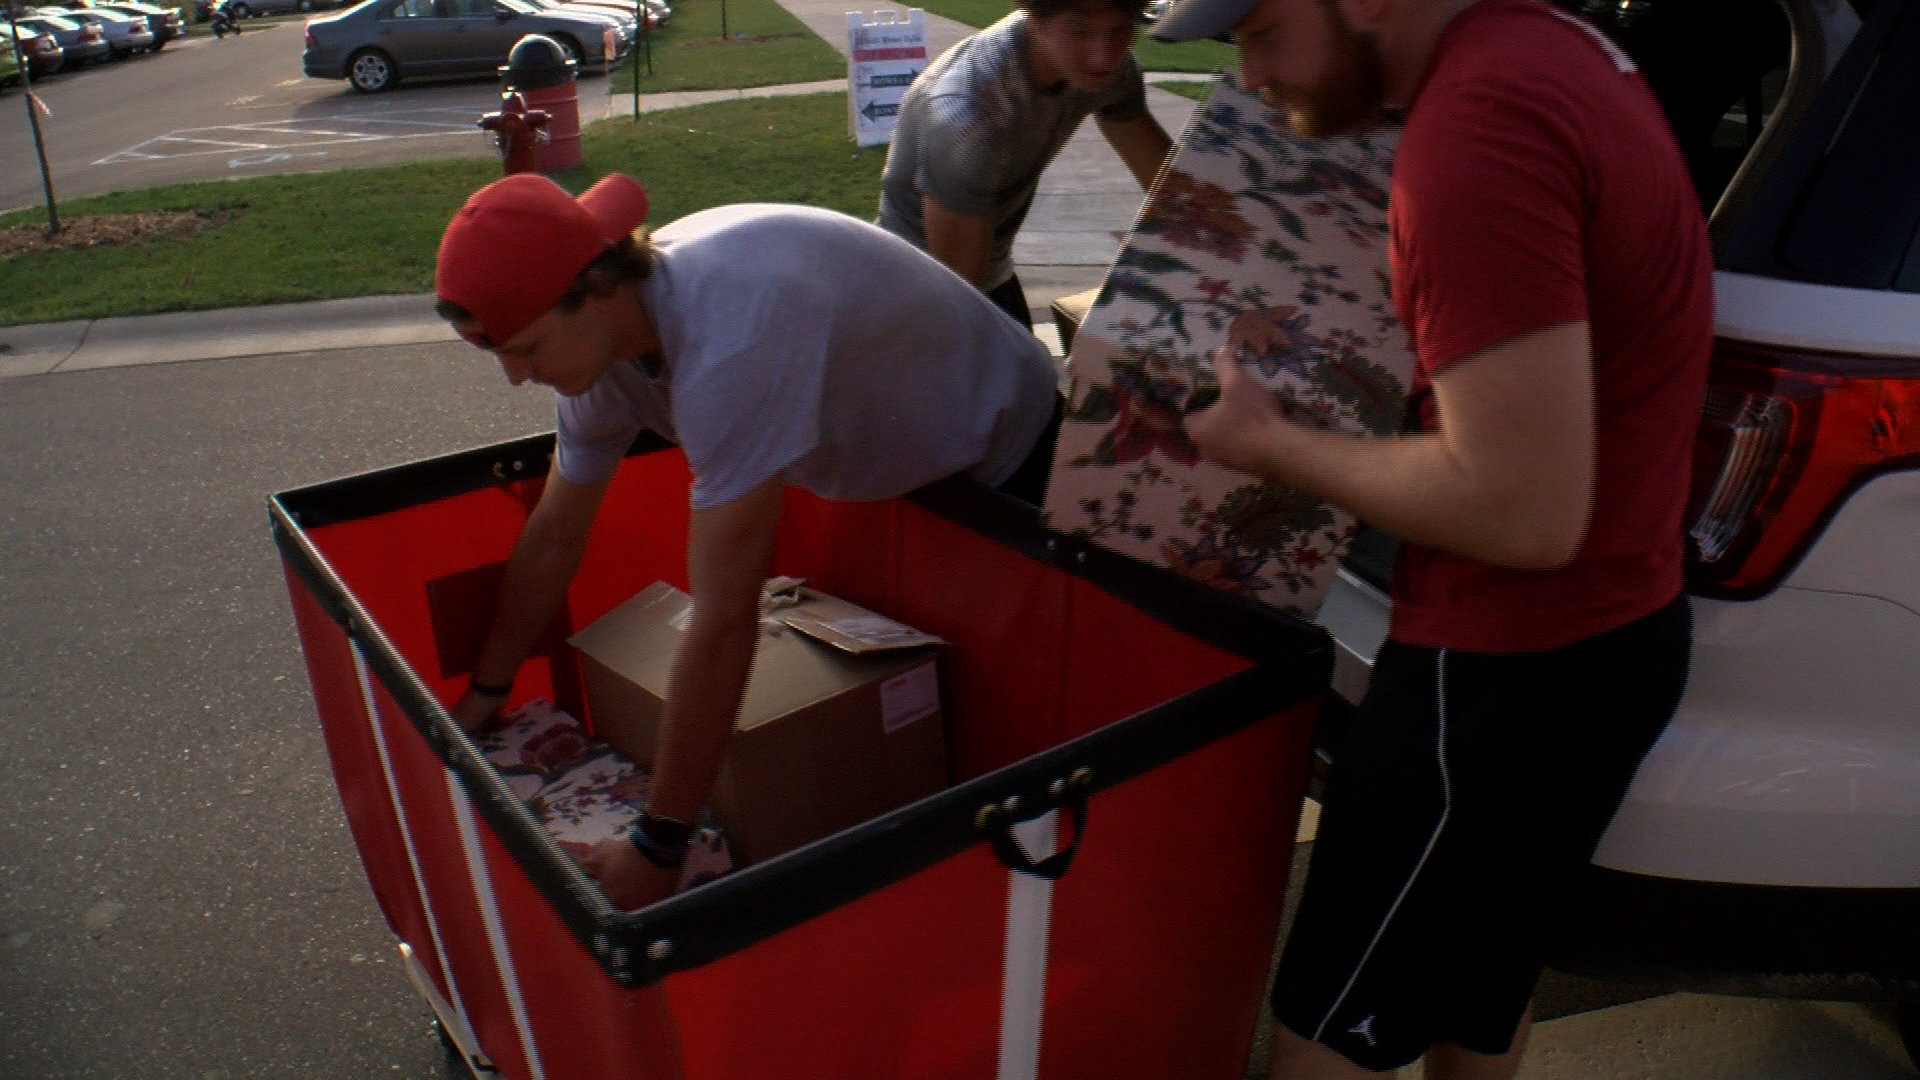 UWRF Football Team Holds Clothing Drive For Hurricane Victims CBS